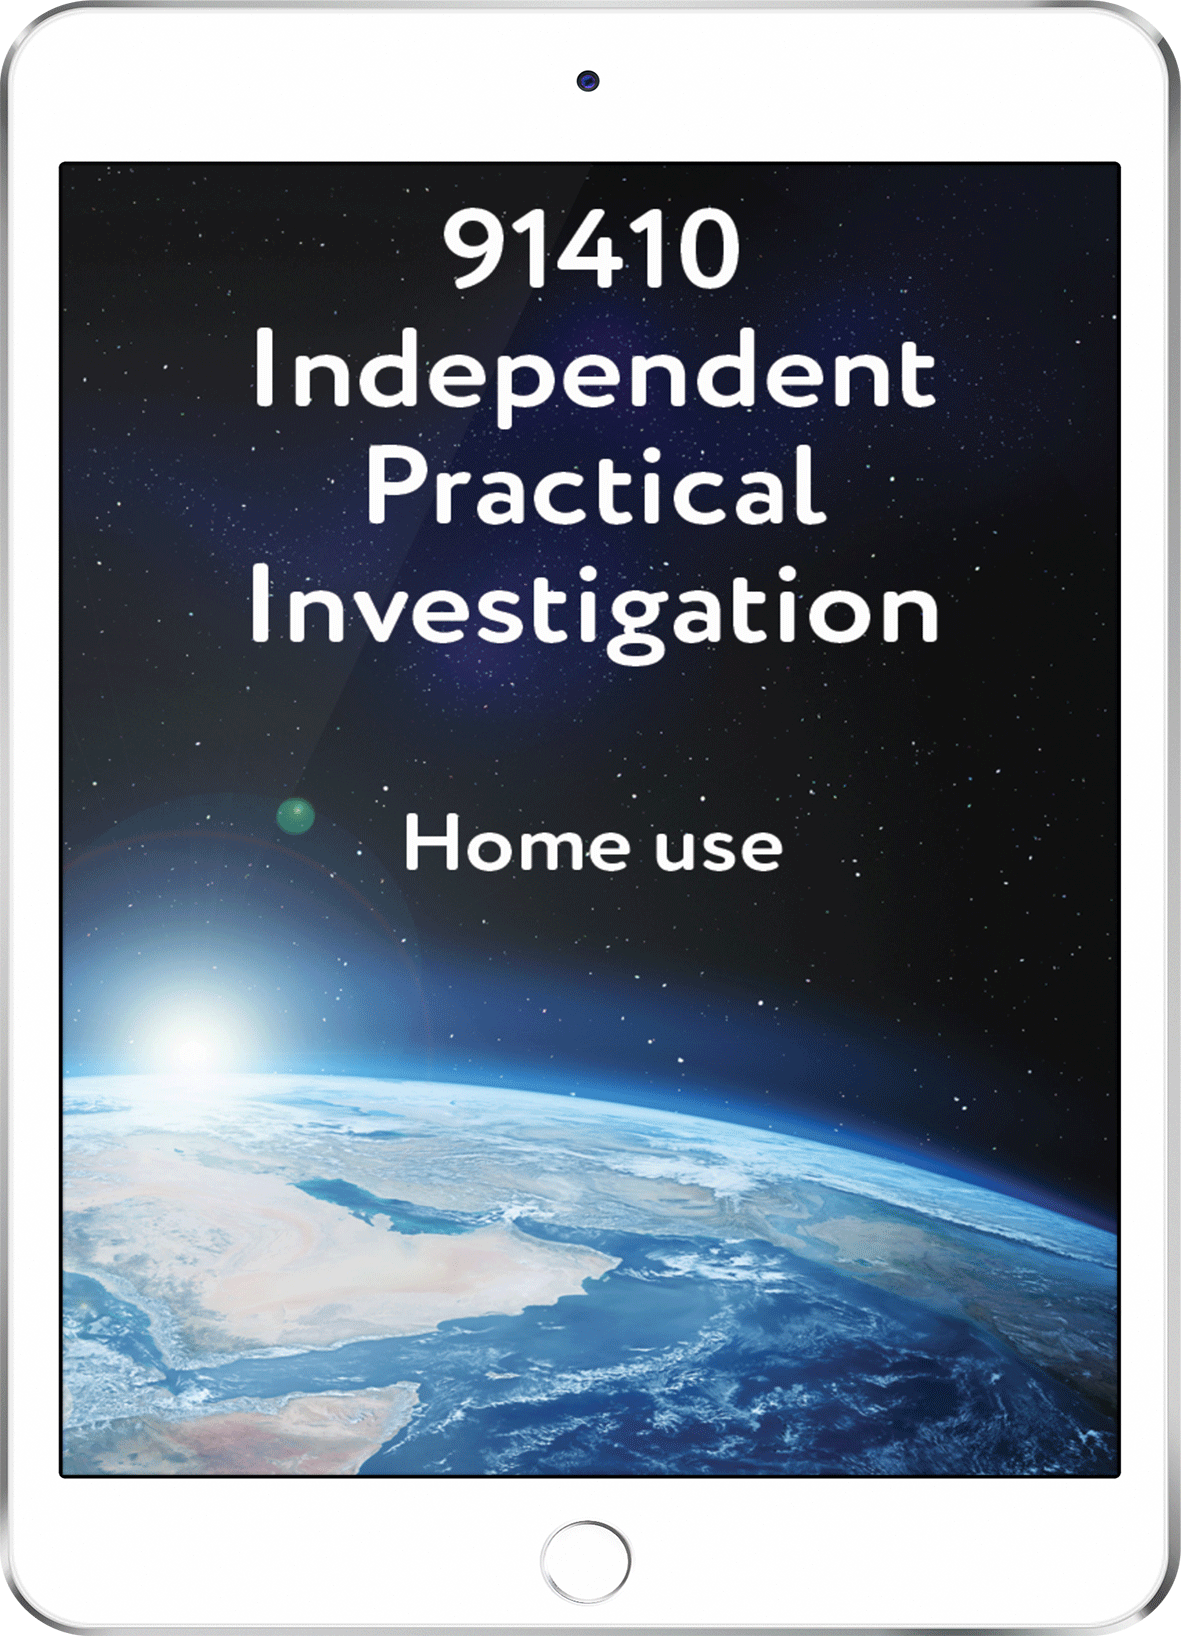 91410 Independent Practical Investigation - Home Use